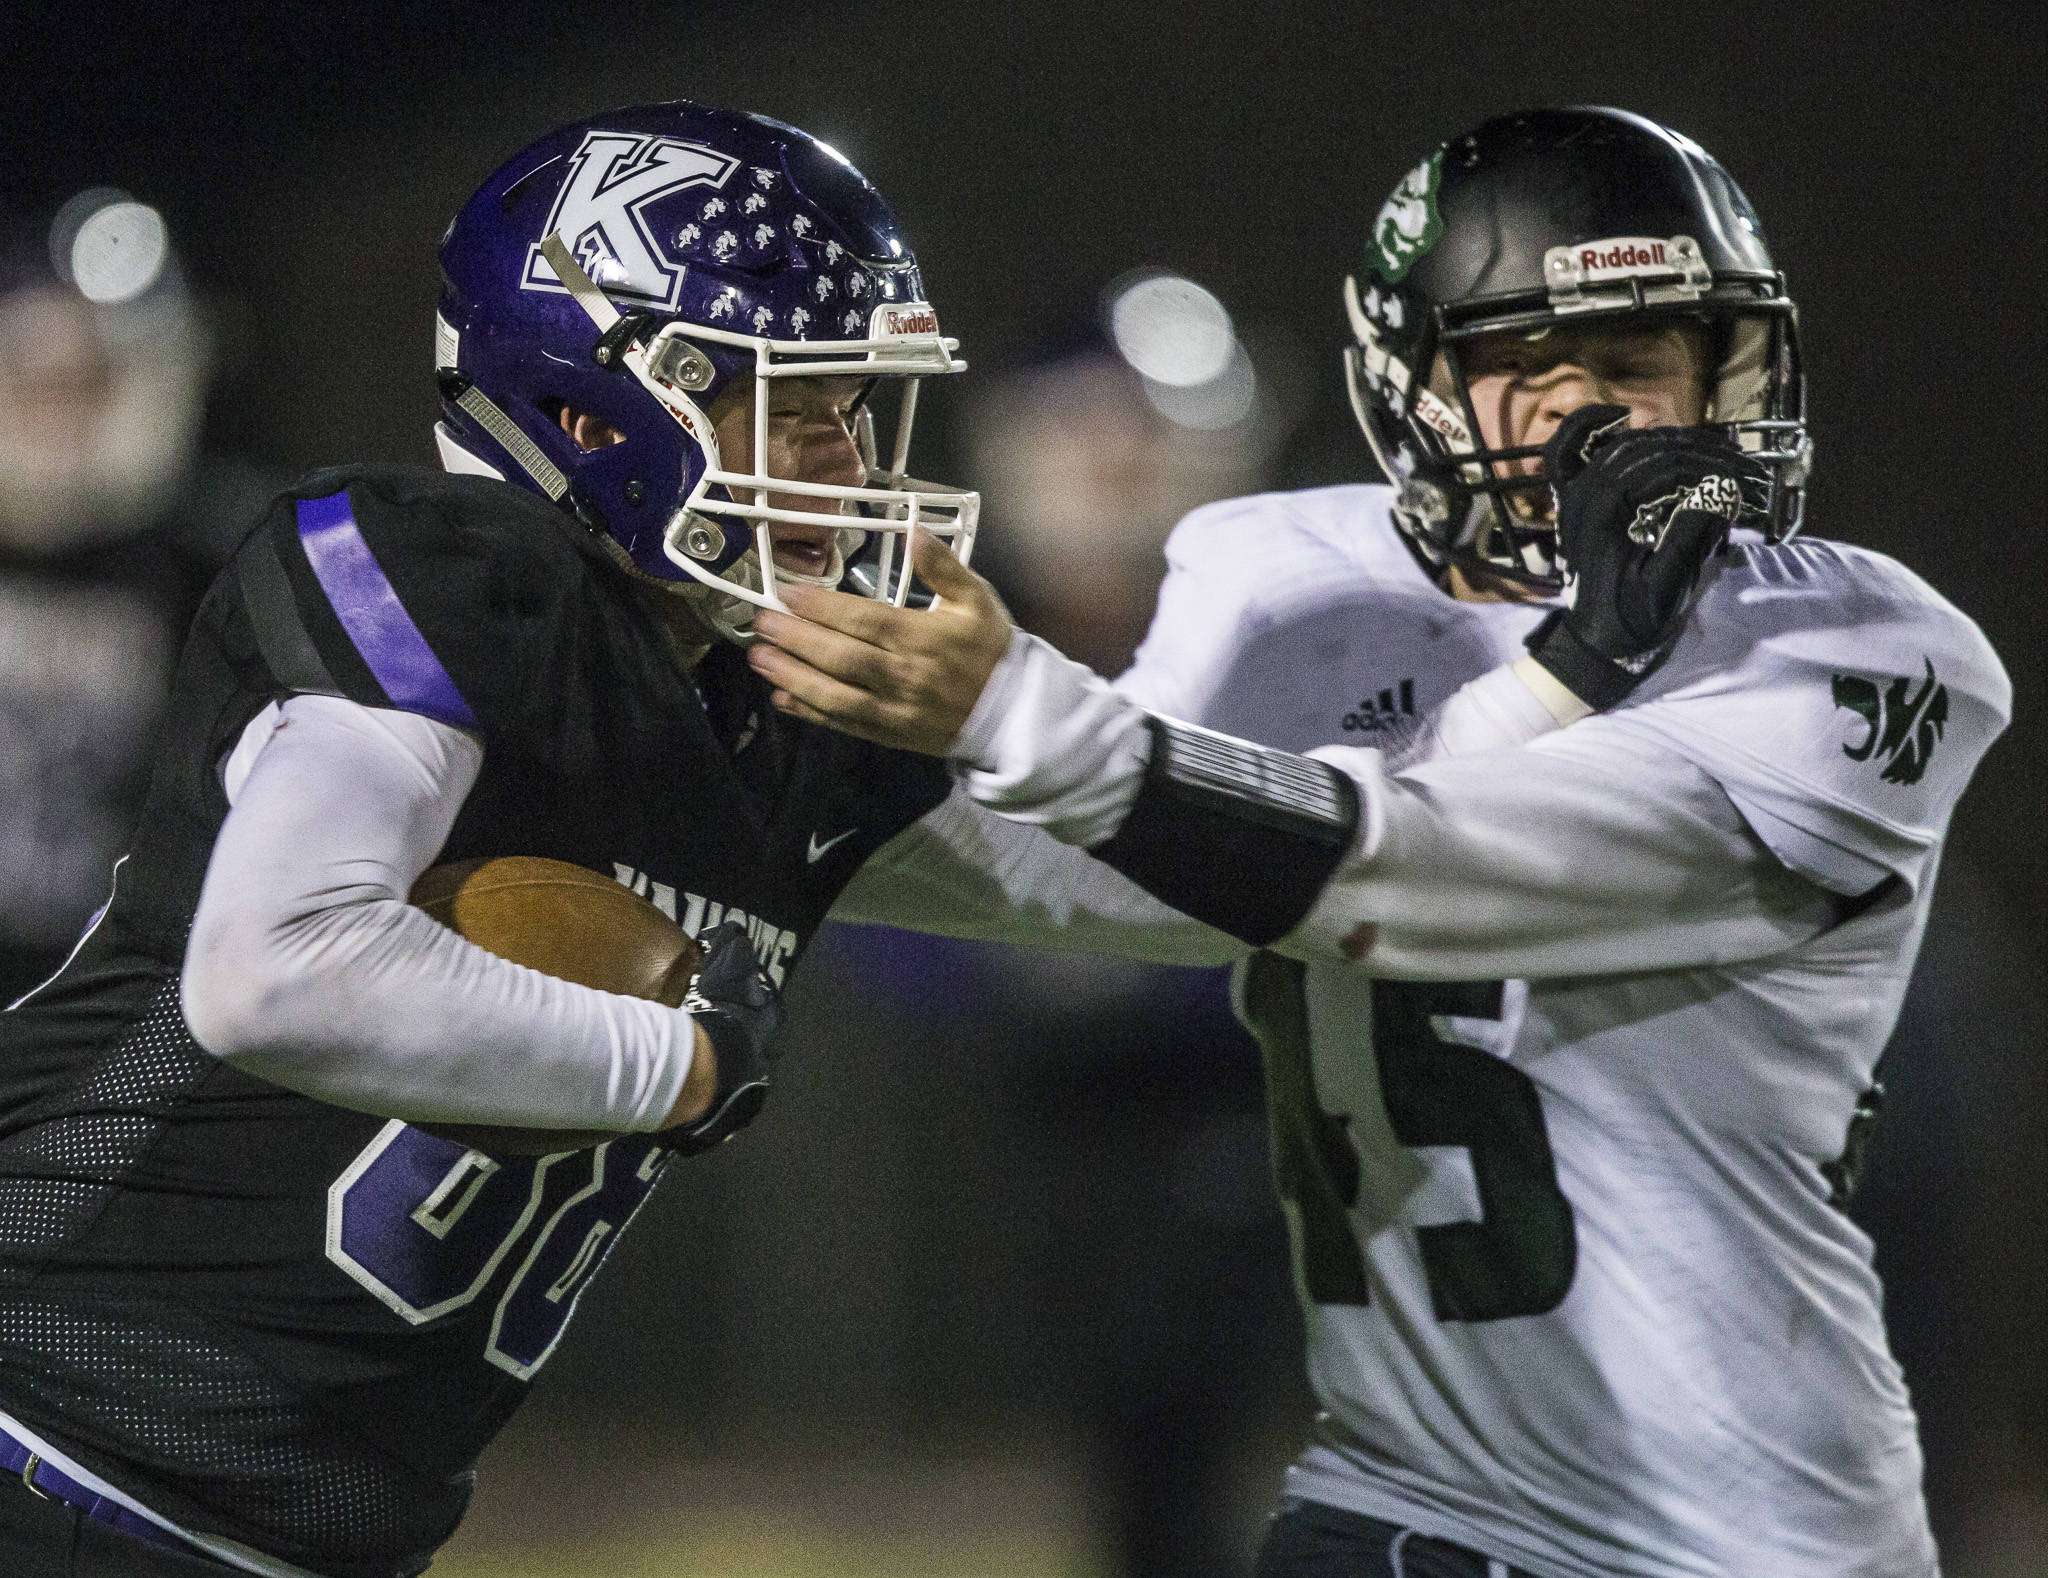 Kamiak’s Ben Farrara (left) and Jackson’s Jack Barclay grab each others facemasks during a game on Nov. 1 at Goddard Stadium in Everett. (Olivia Vanni / The Herald)